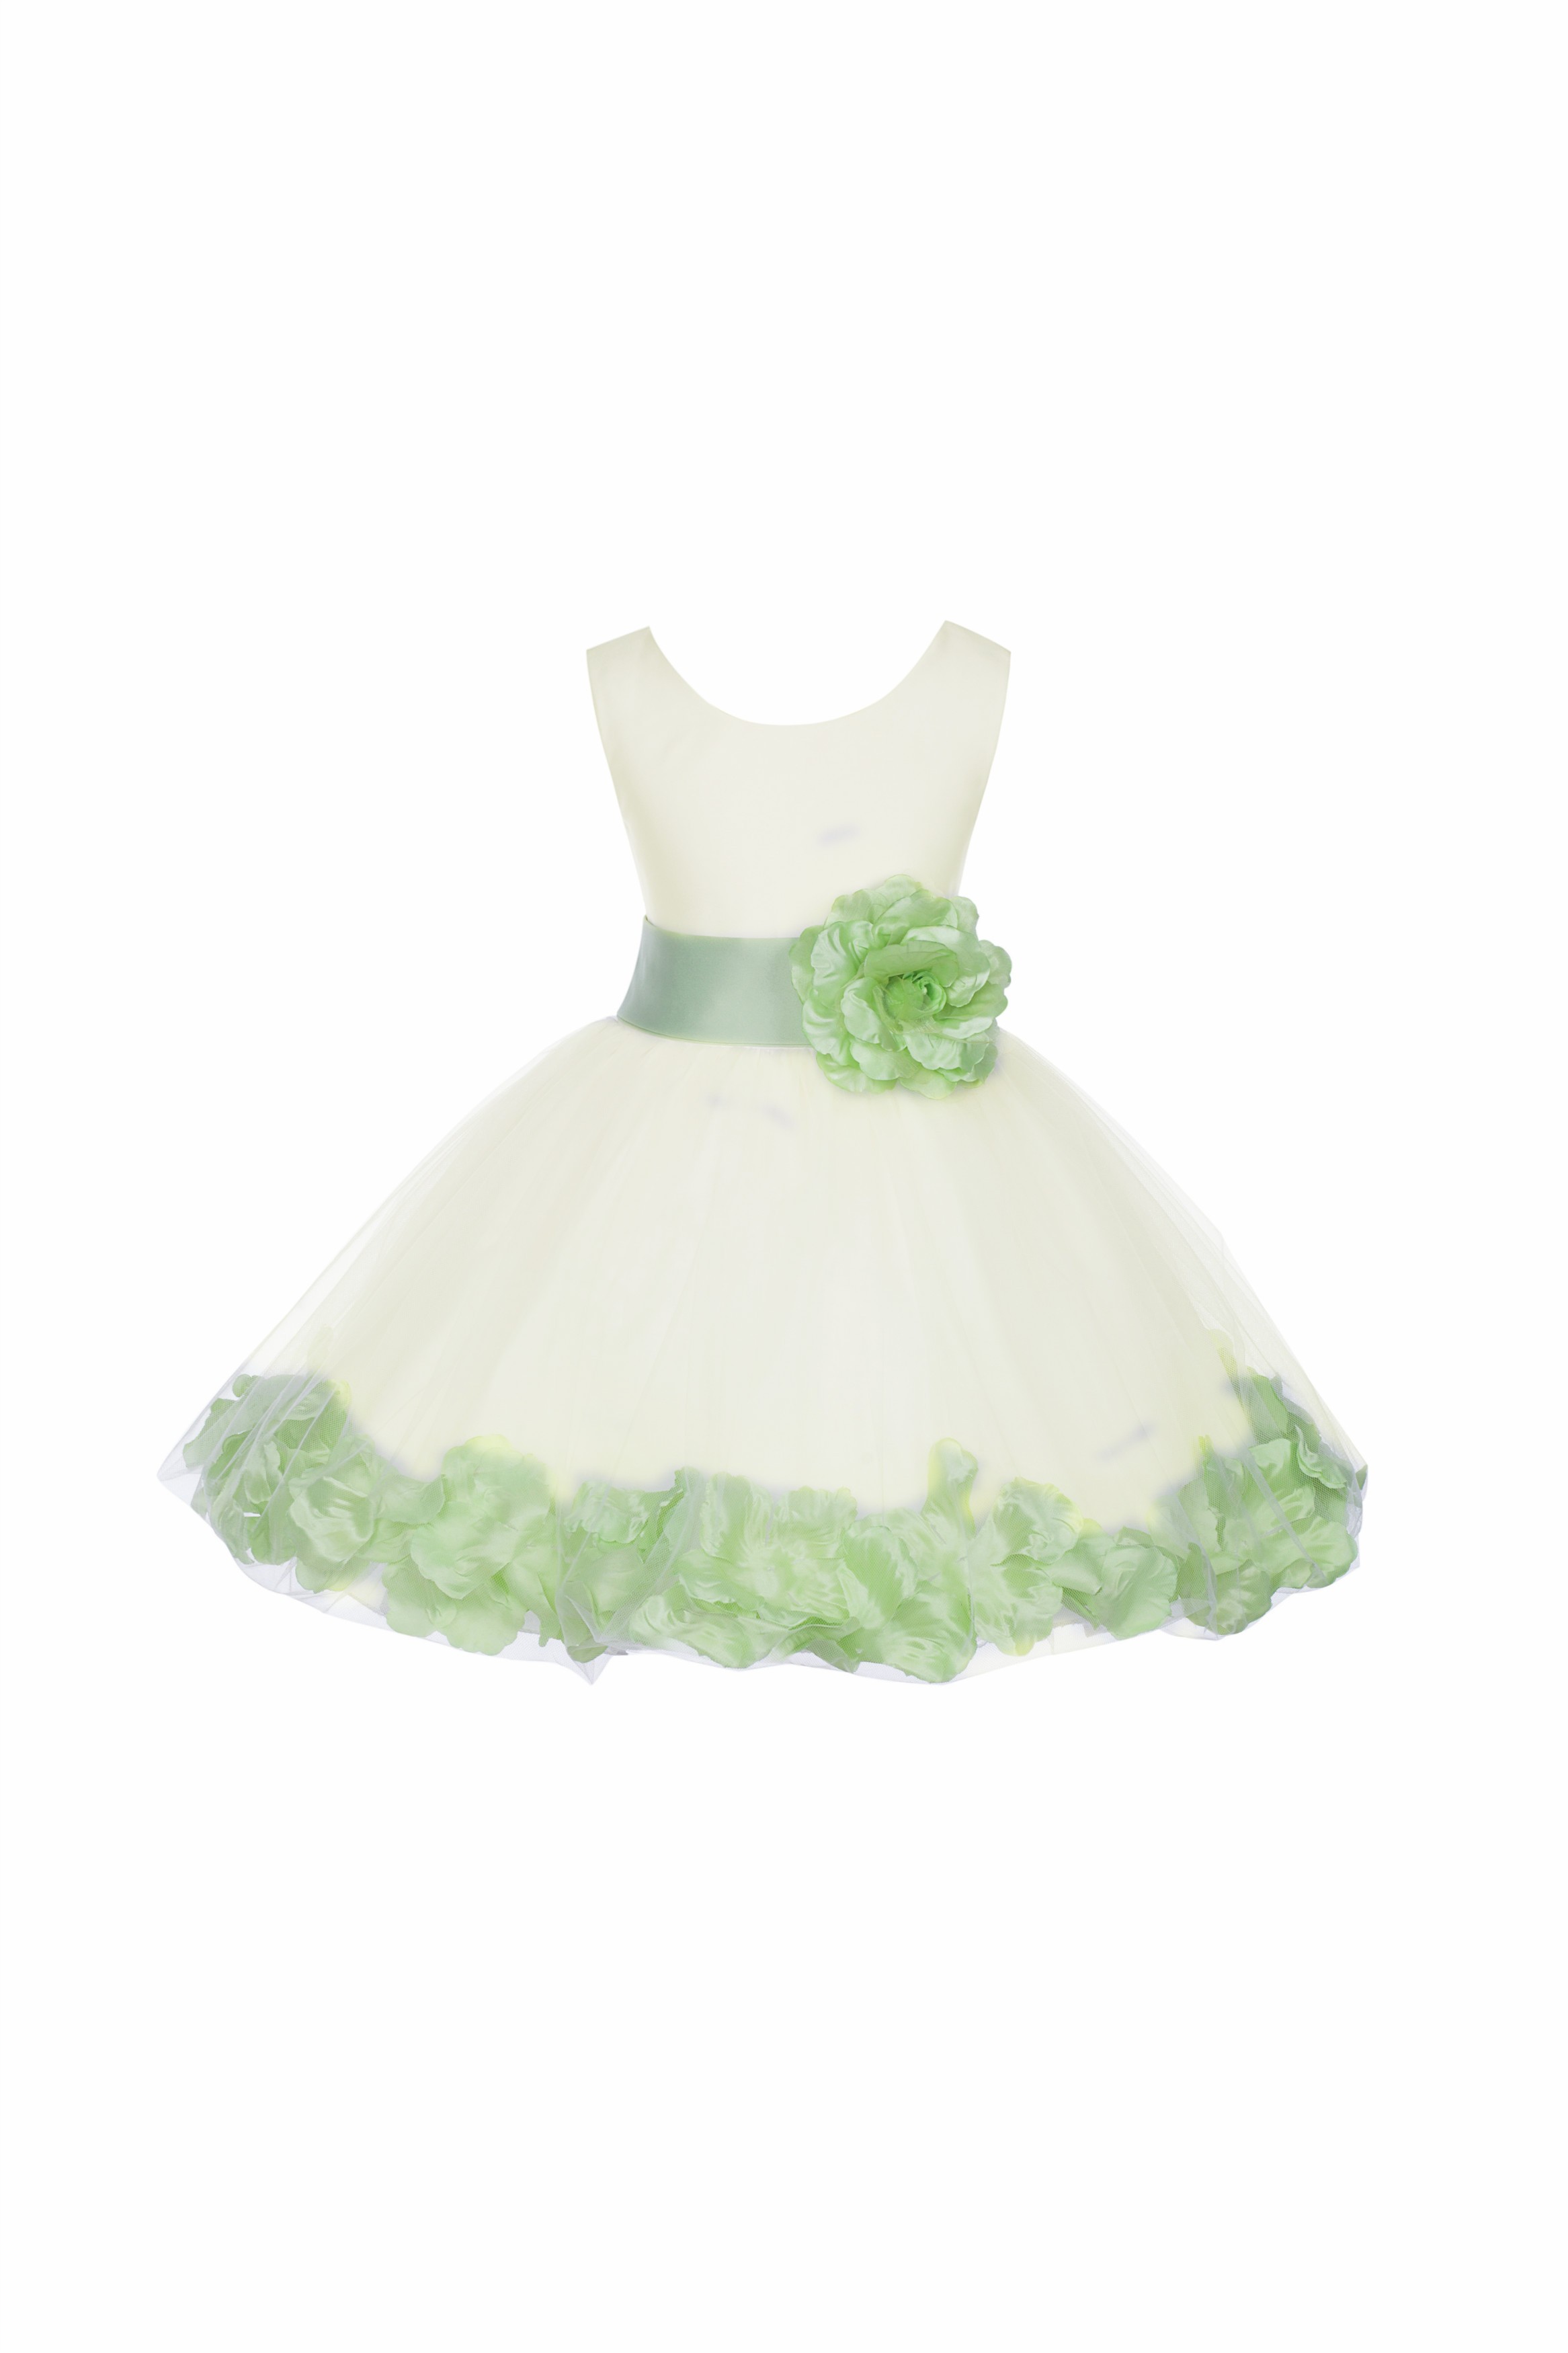 Ivory/Apple Green Rose Petals Tulle Flower Girl Dress Pageant 305T